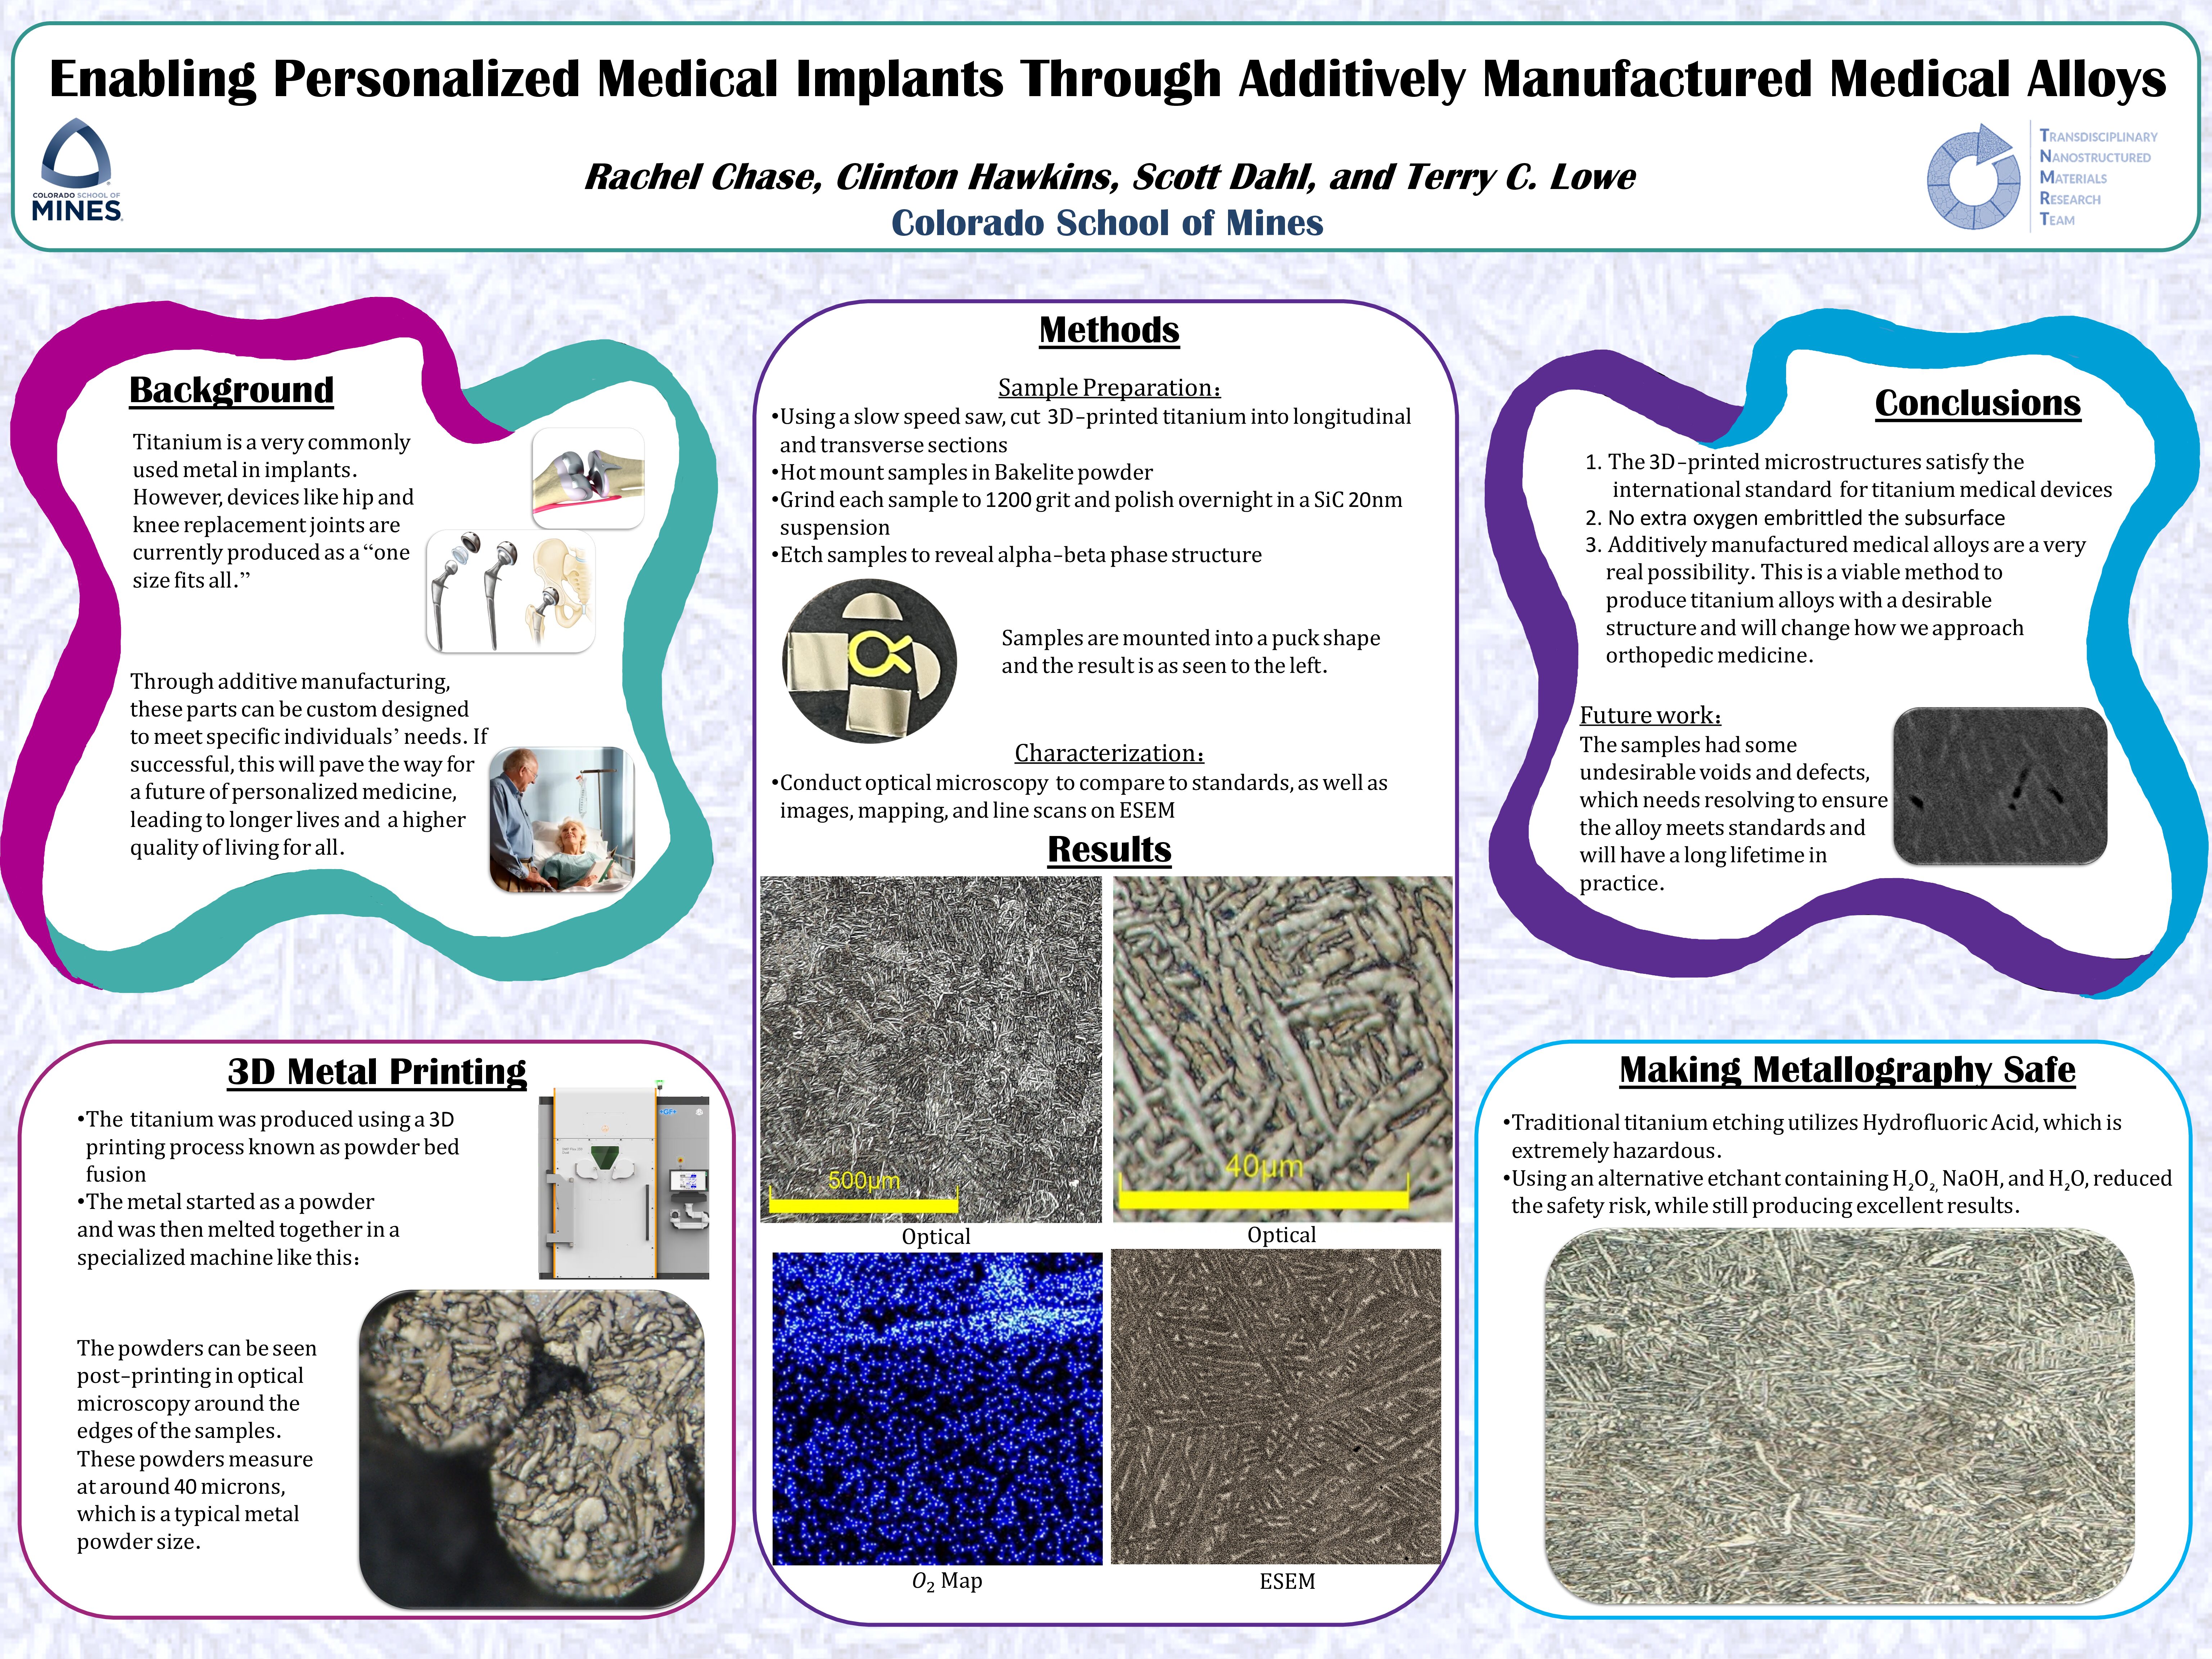 P114 Enabling Personalized Medical Implants Through Additively Manufactured Medical Alloys